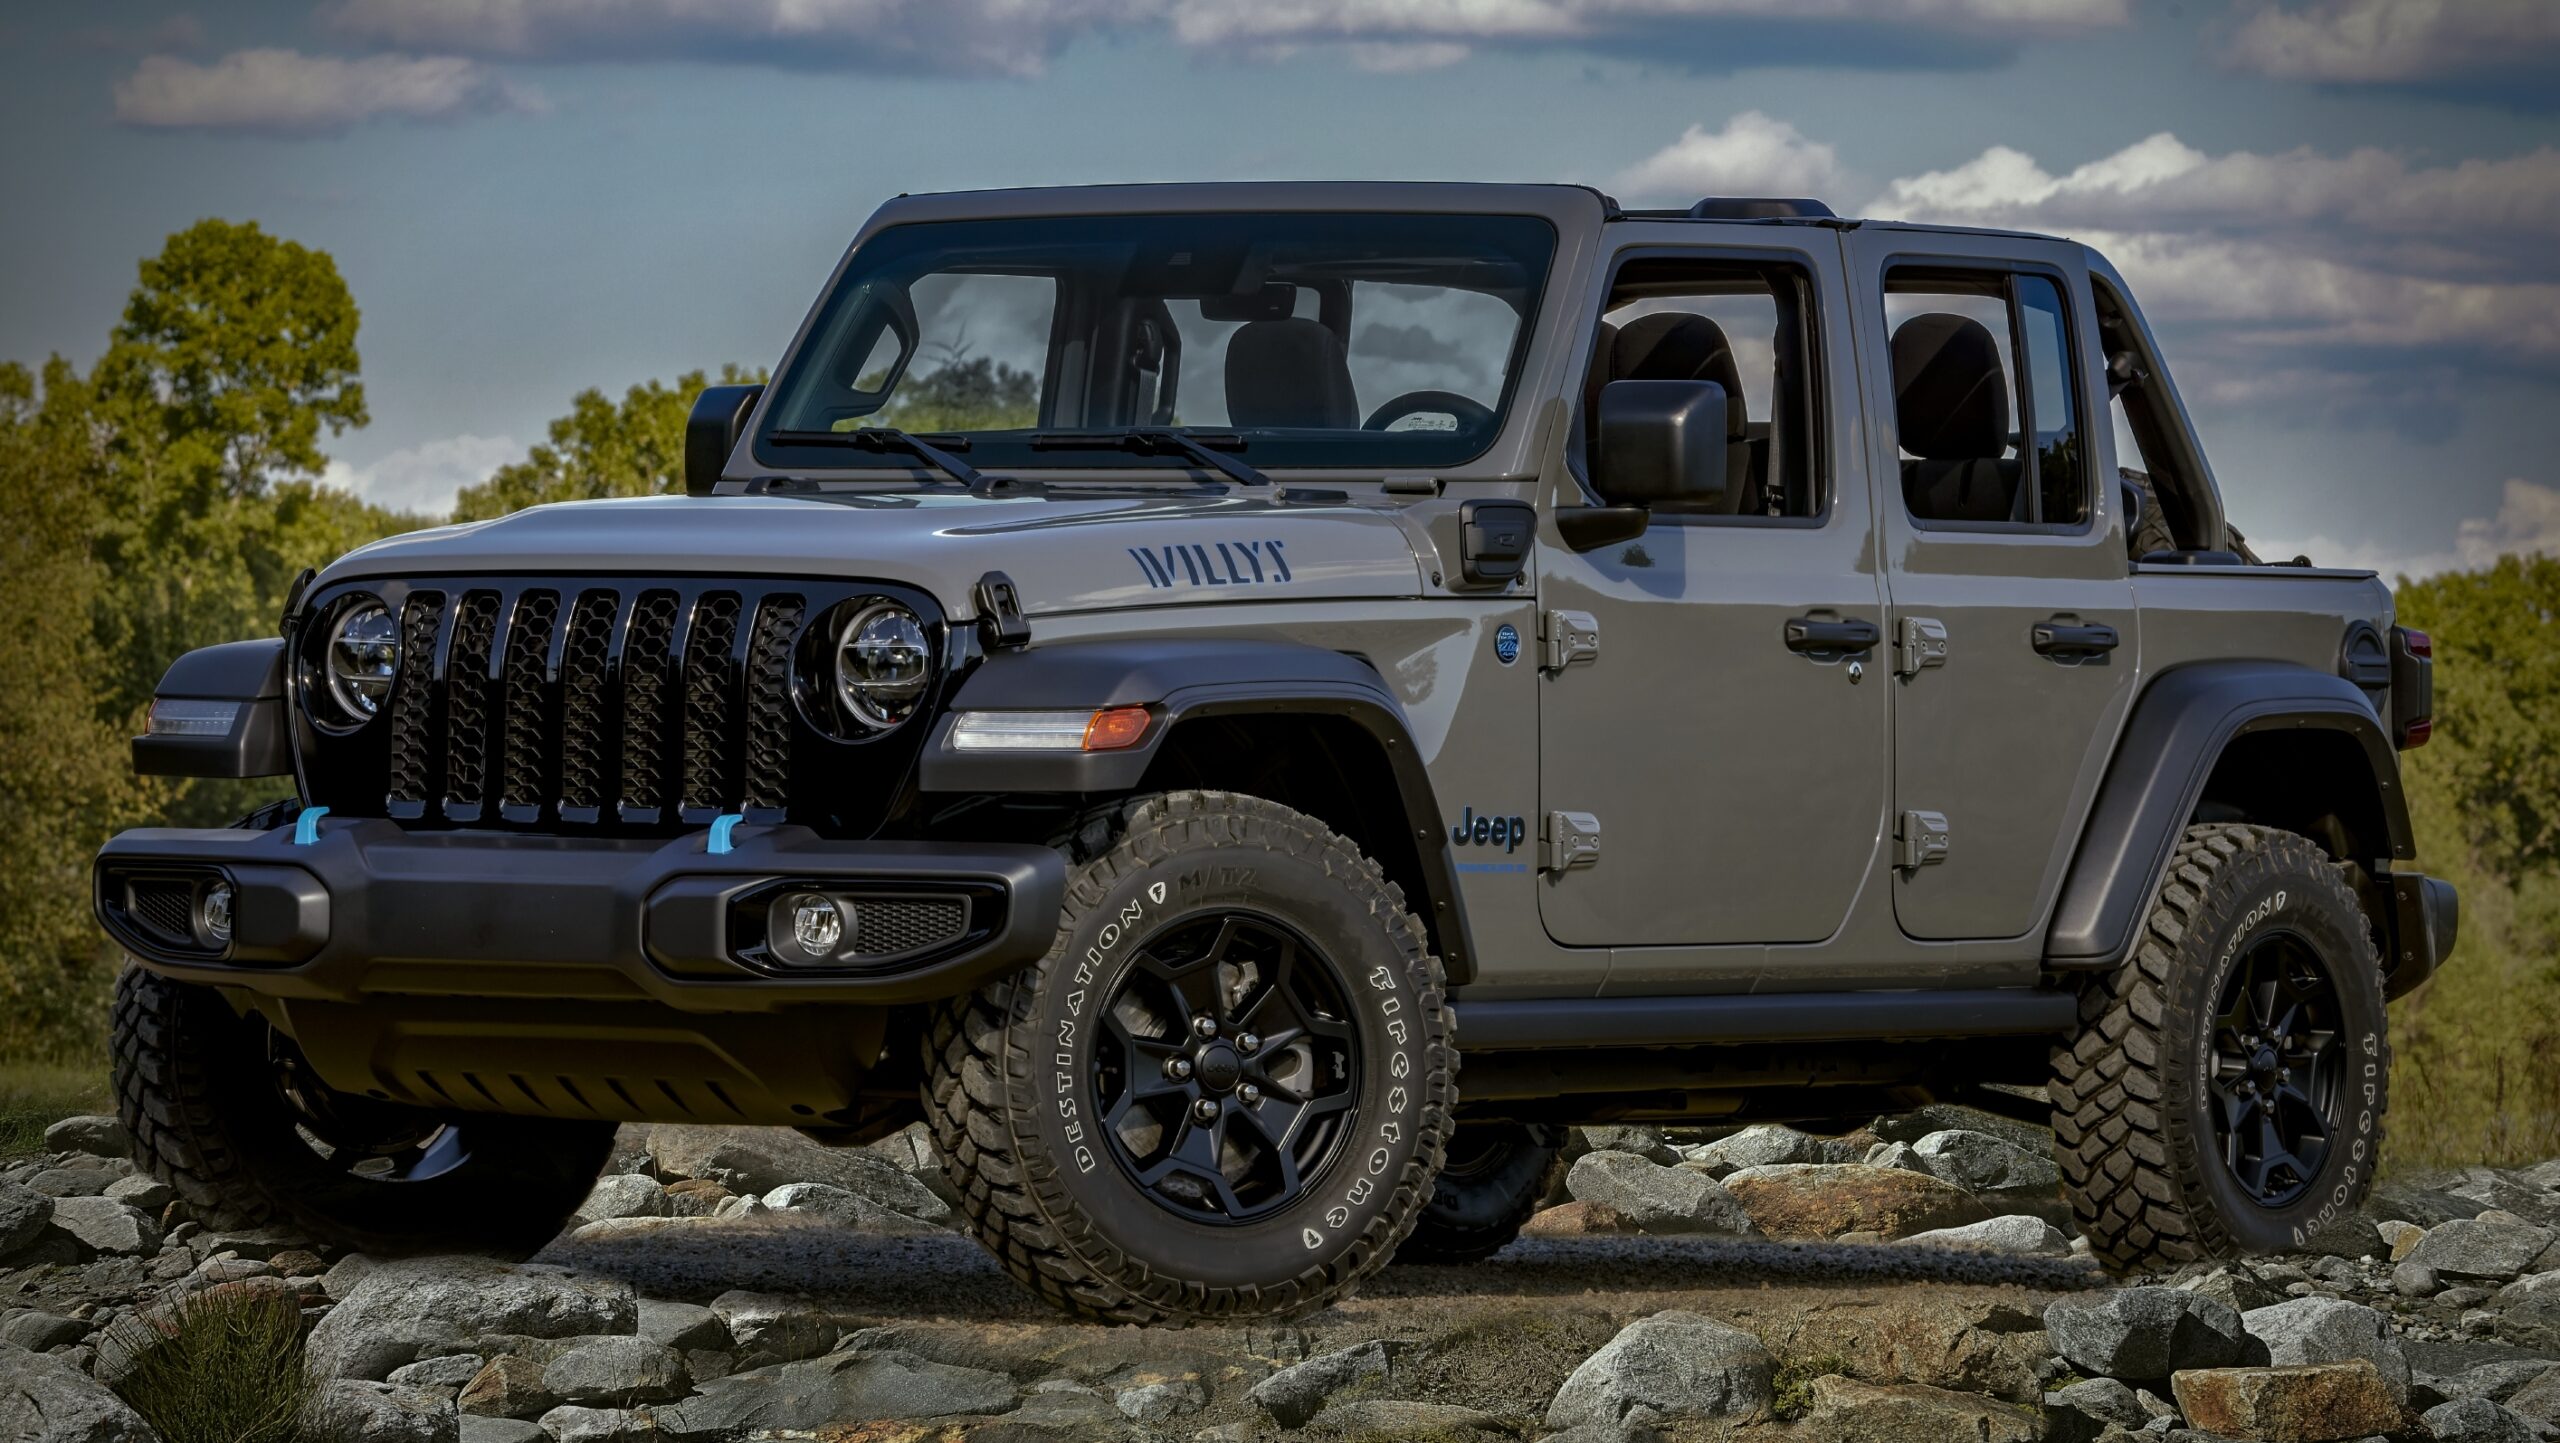 Periodo Escolar 2022 A 2023 Willy's Jeep Price IMAGESEE